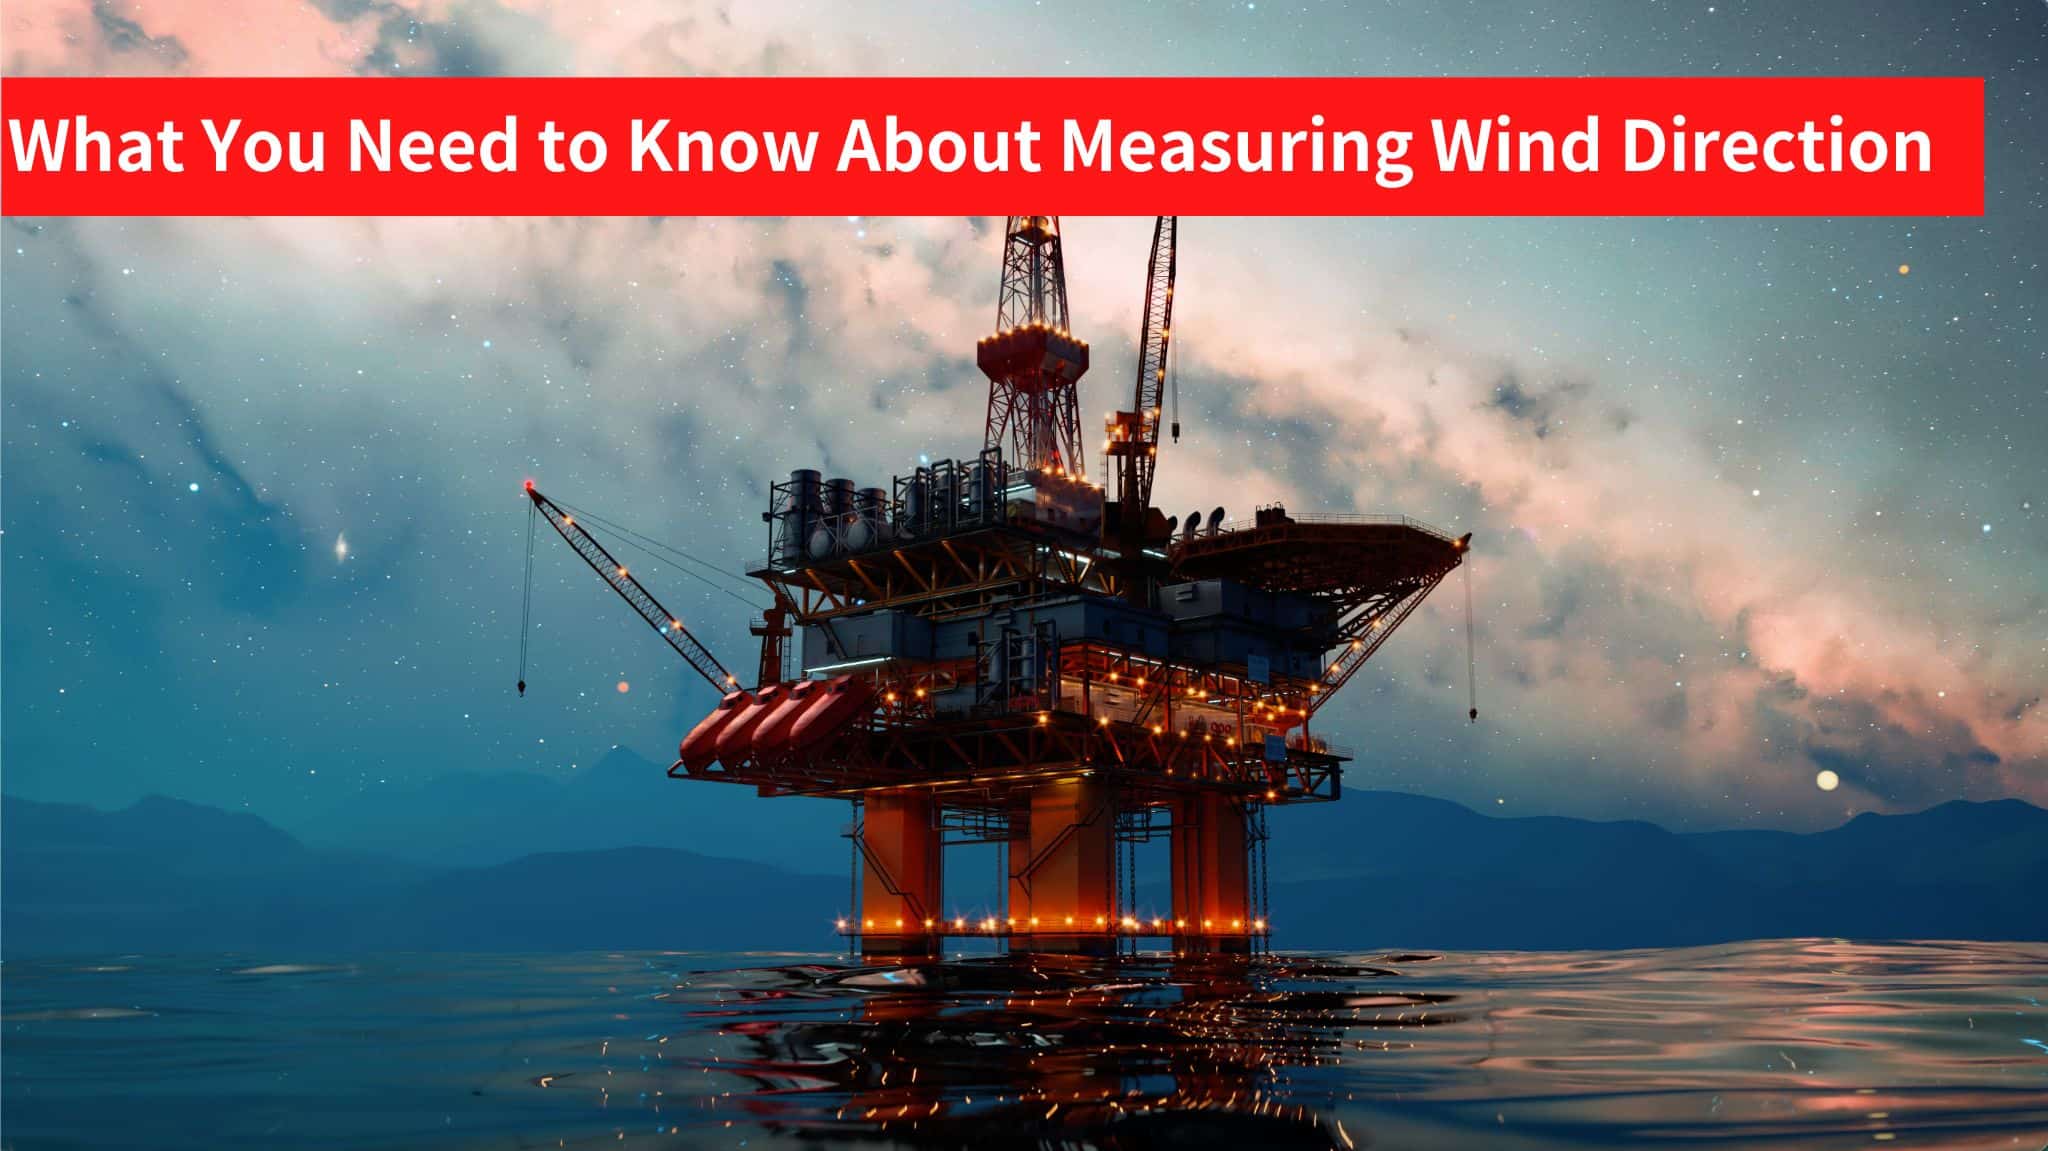 What You Need to Know About Measuring Wind Direction